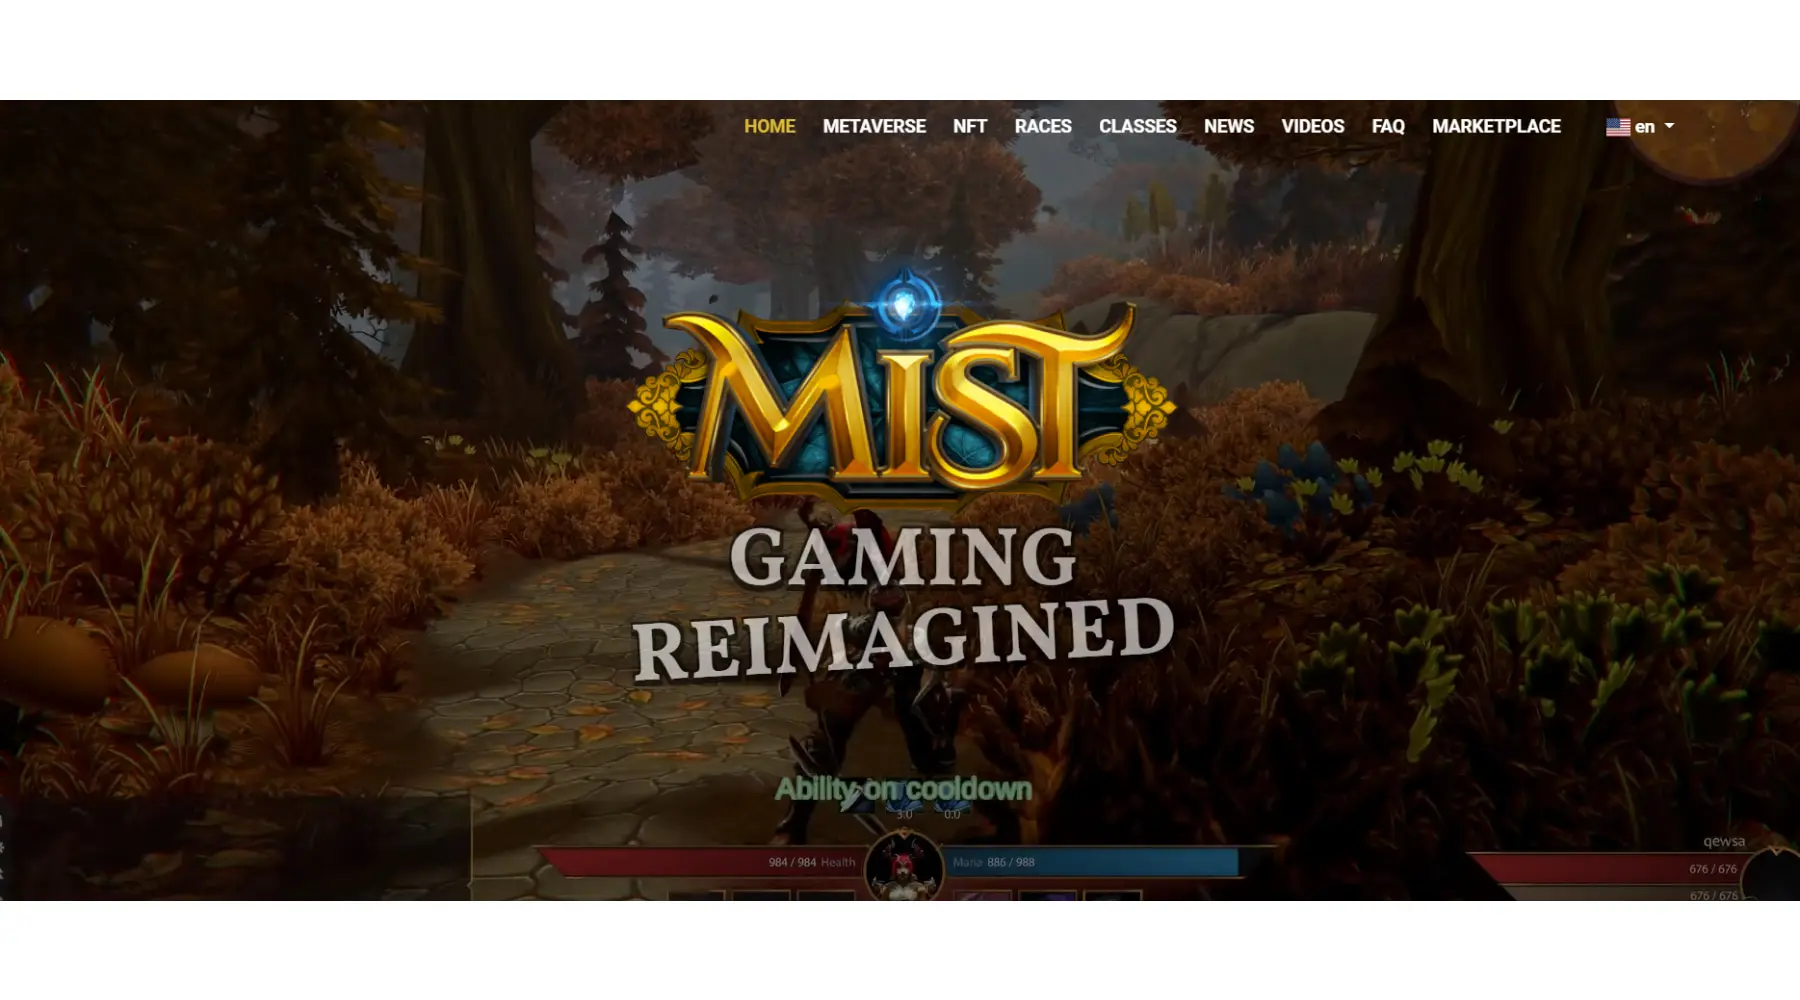 Welcome to Mist Gaming! - Mist Gaming